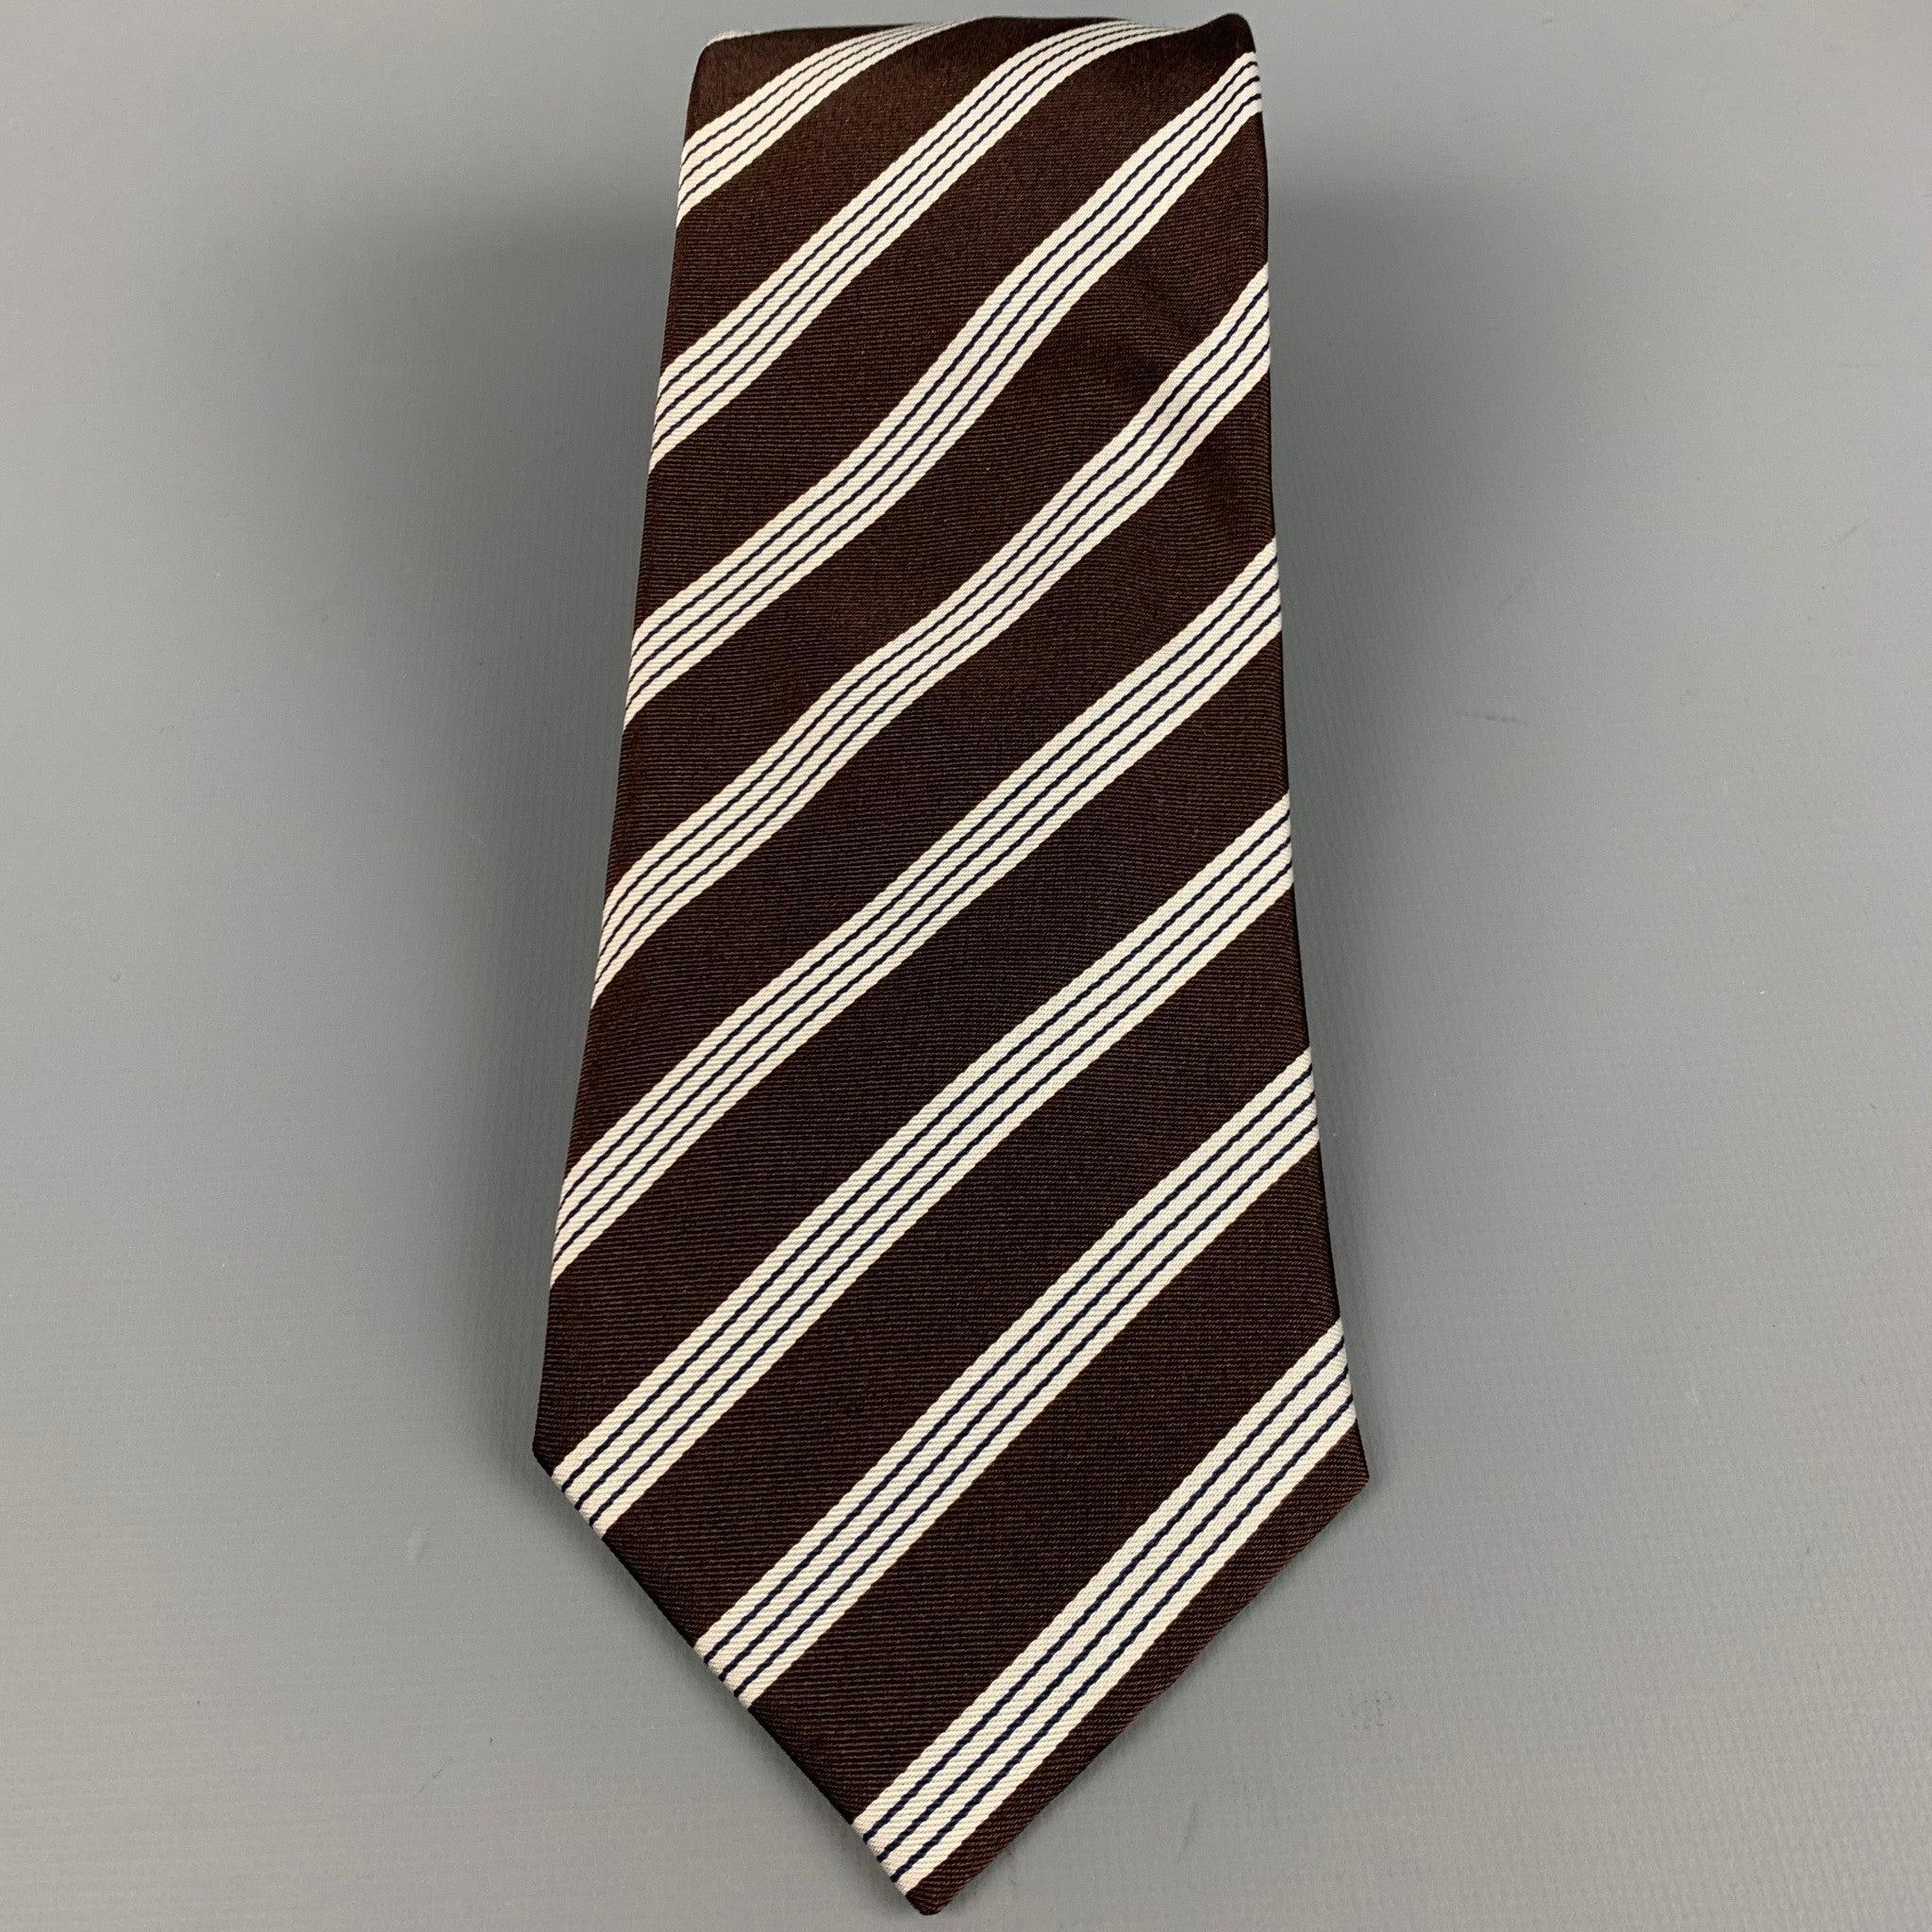 LUCIANO BARBERA
necktie in a brown silk featuring white diagonal stripes. Made in Italy.Excellent Pre-Owned Condition. 

Measurements: 
  Width: 3.5 inches Length: 61 inches 
  
  
 
Reference: 127745
Category: Tie
More Details
    
Brand:  LUCIANO